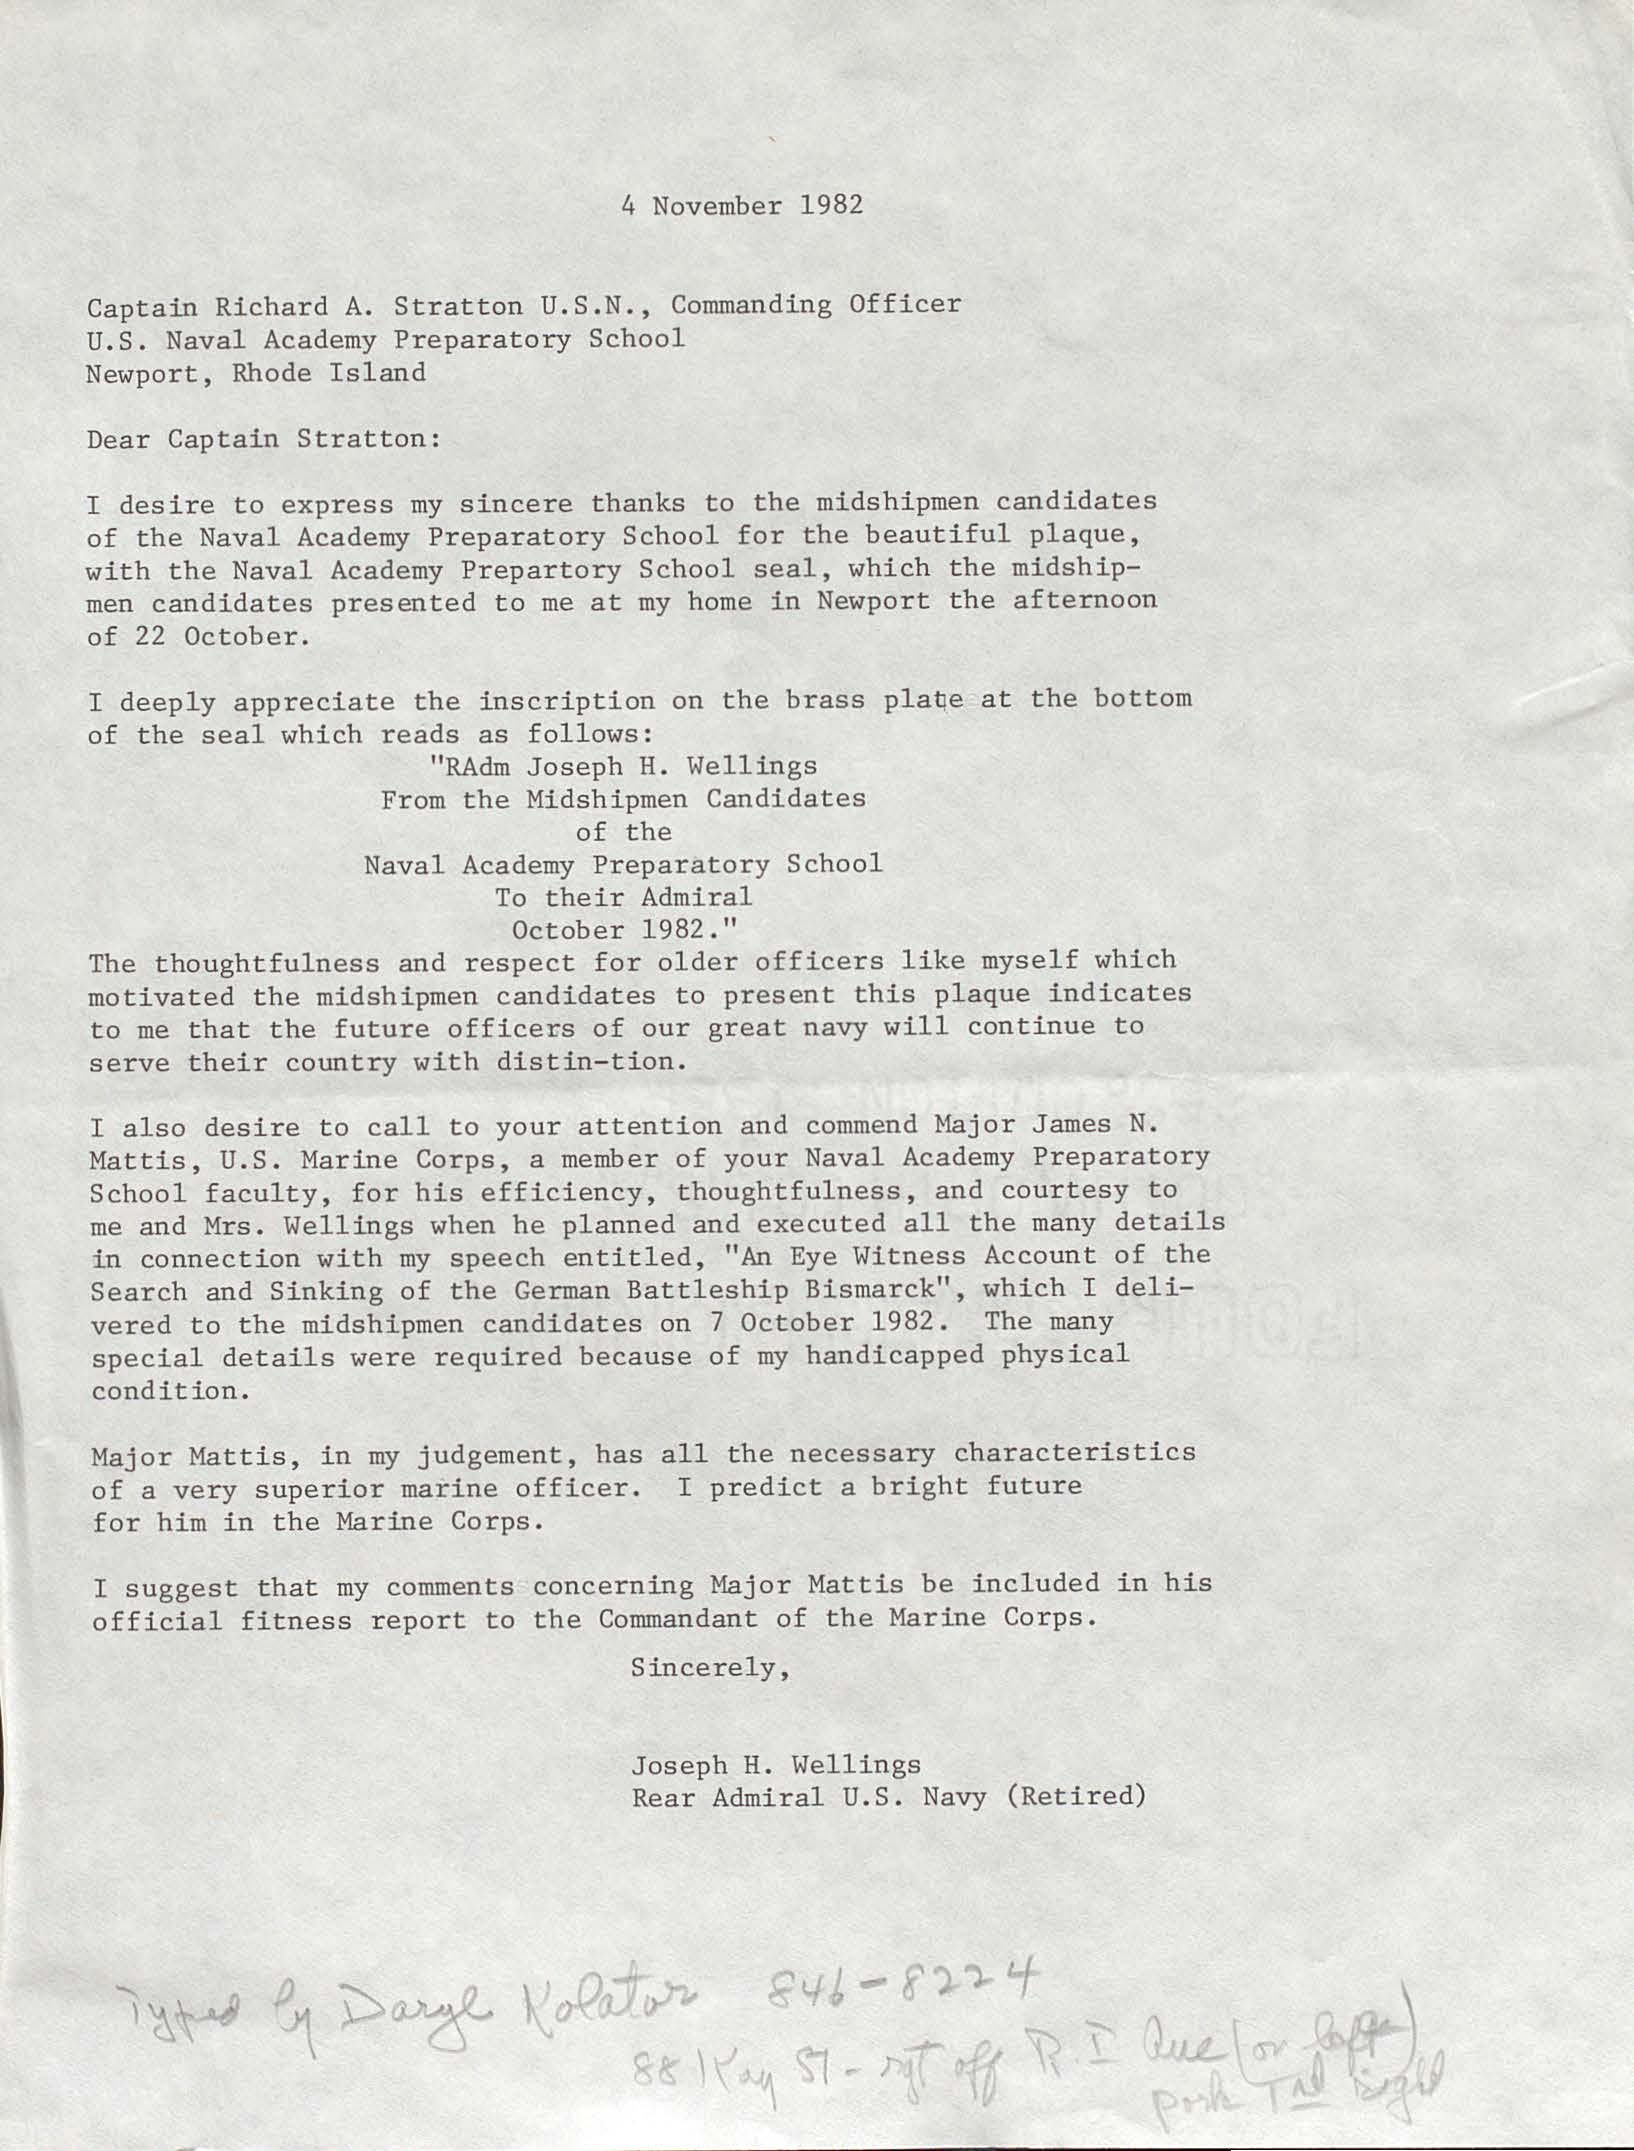 Letter to Captain Richard A. Stratton from RADM Joseph H. Wellings